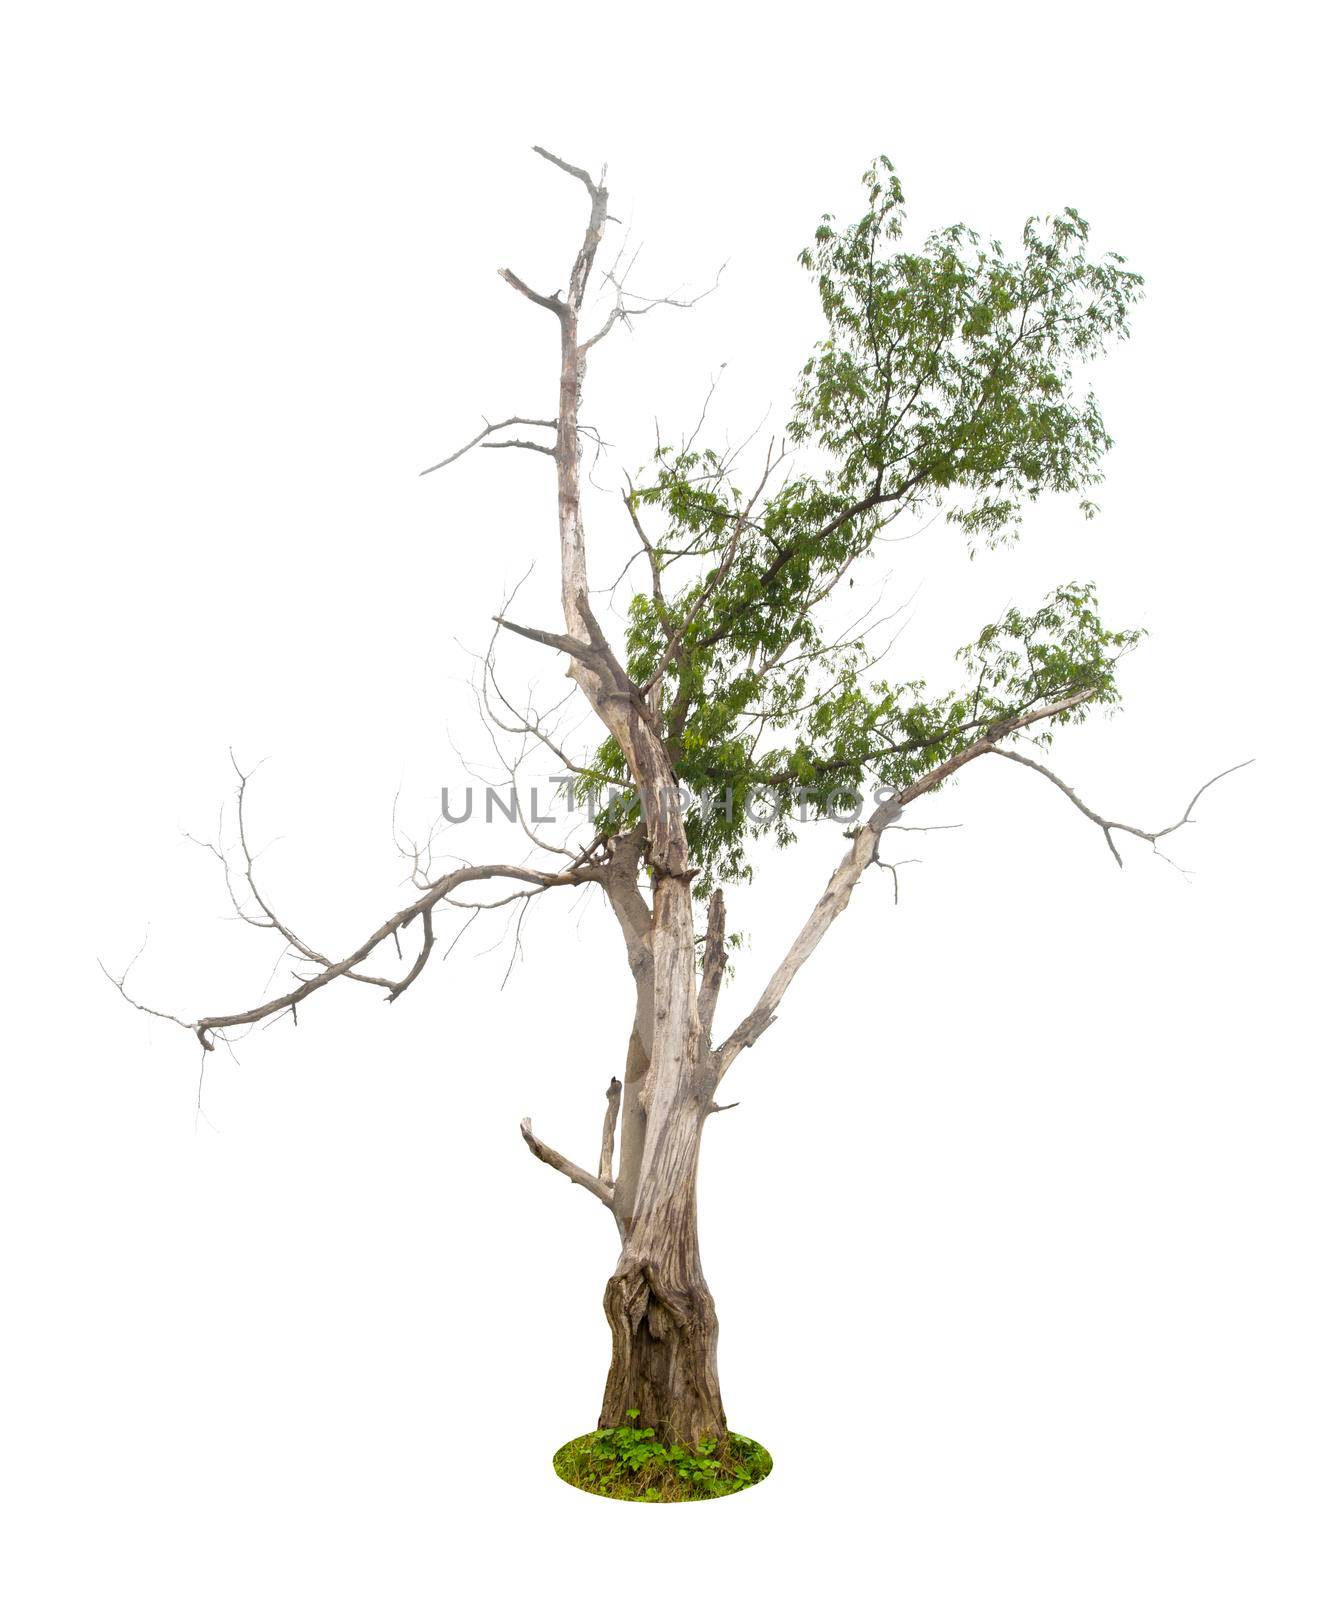 Dead tree on one side and living tree on the different side. Isolated on a white background.